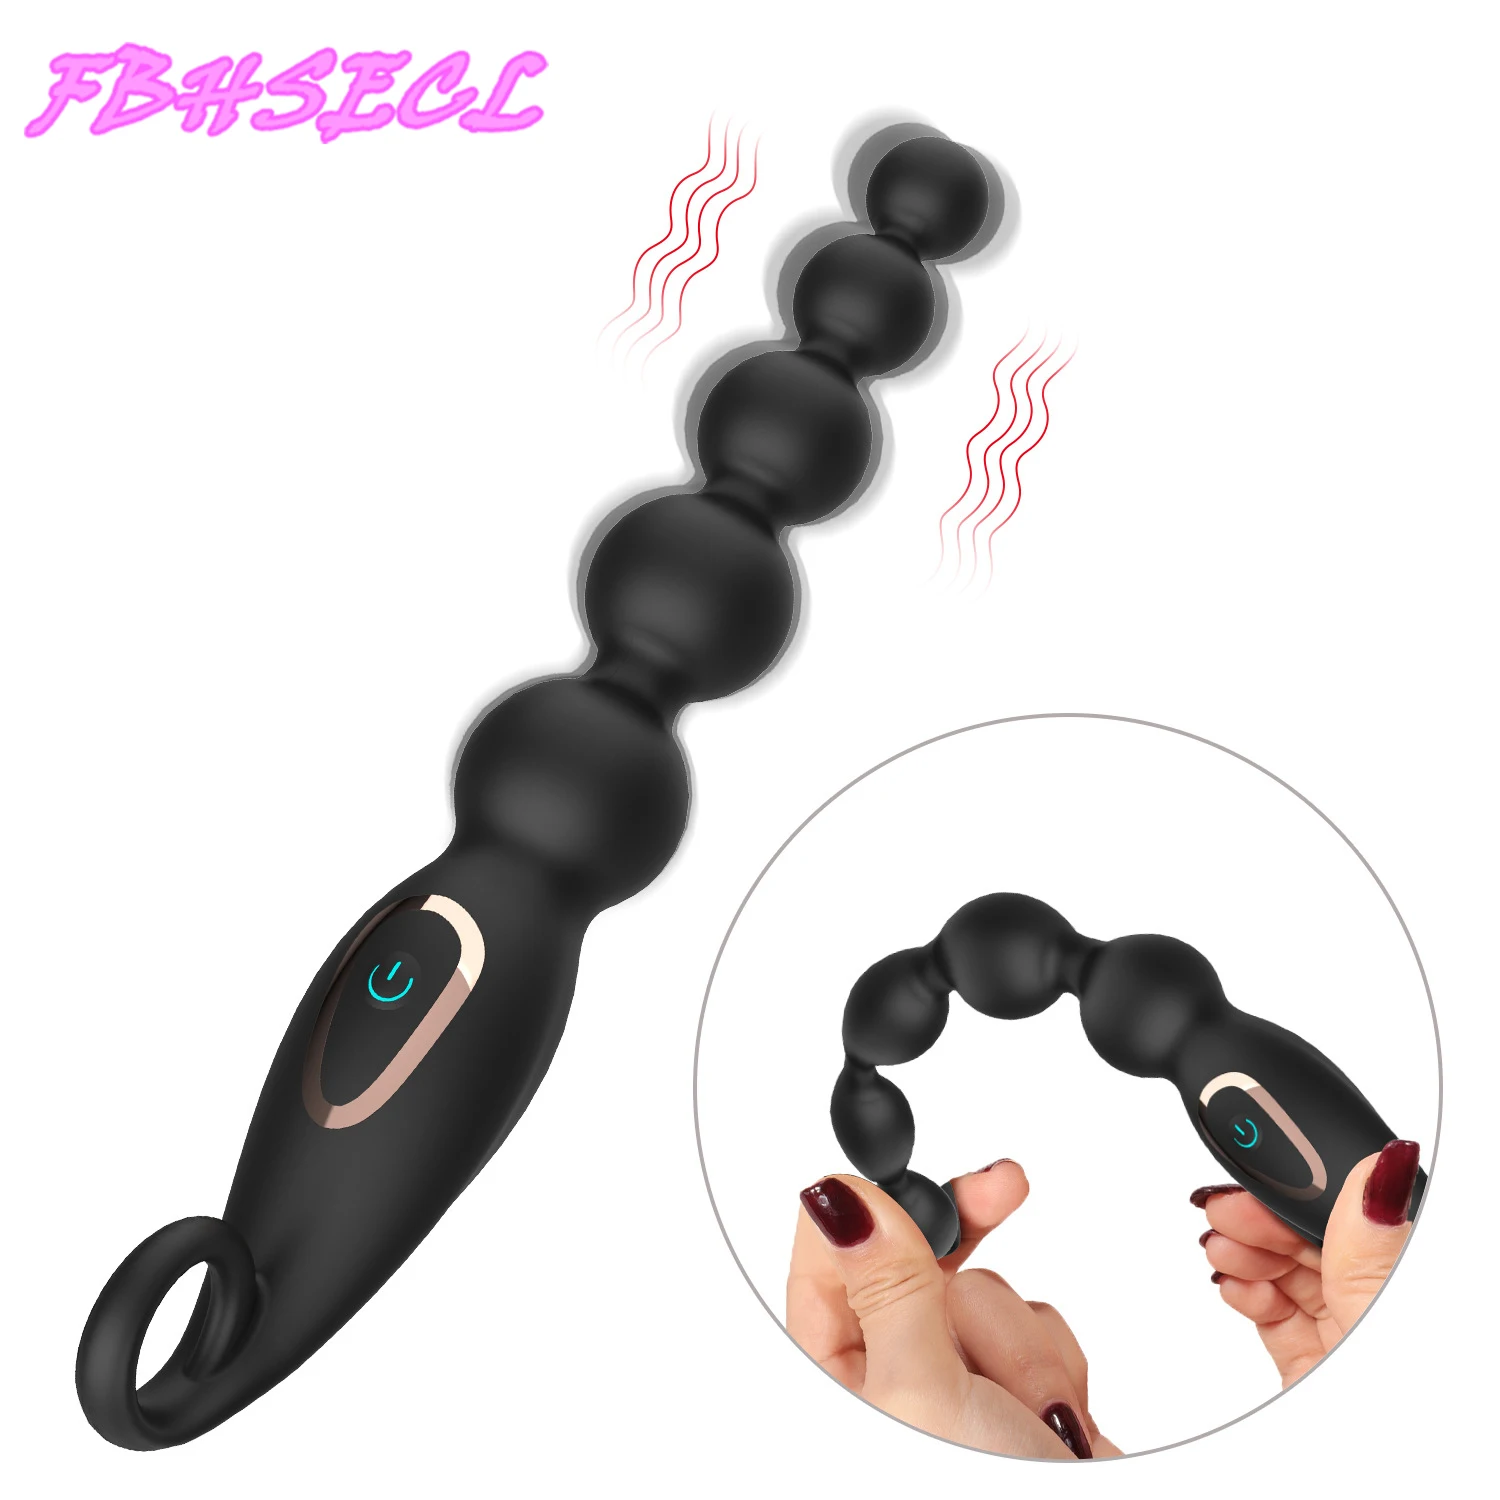 FBHSECL Anal Beads Vibrator Anal Training Toy 7 Frequency Sex Toy For Women Prostate Stimulator Pull Ring Anal Plug Butt Plug